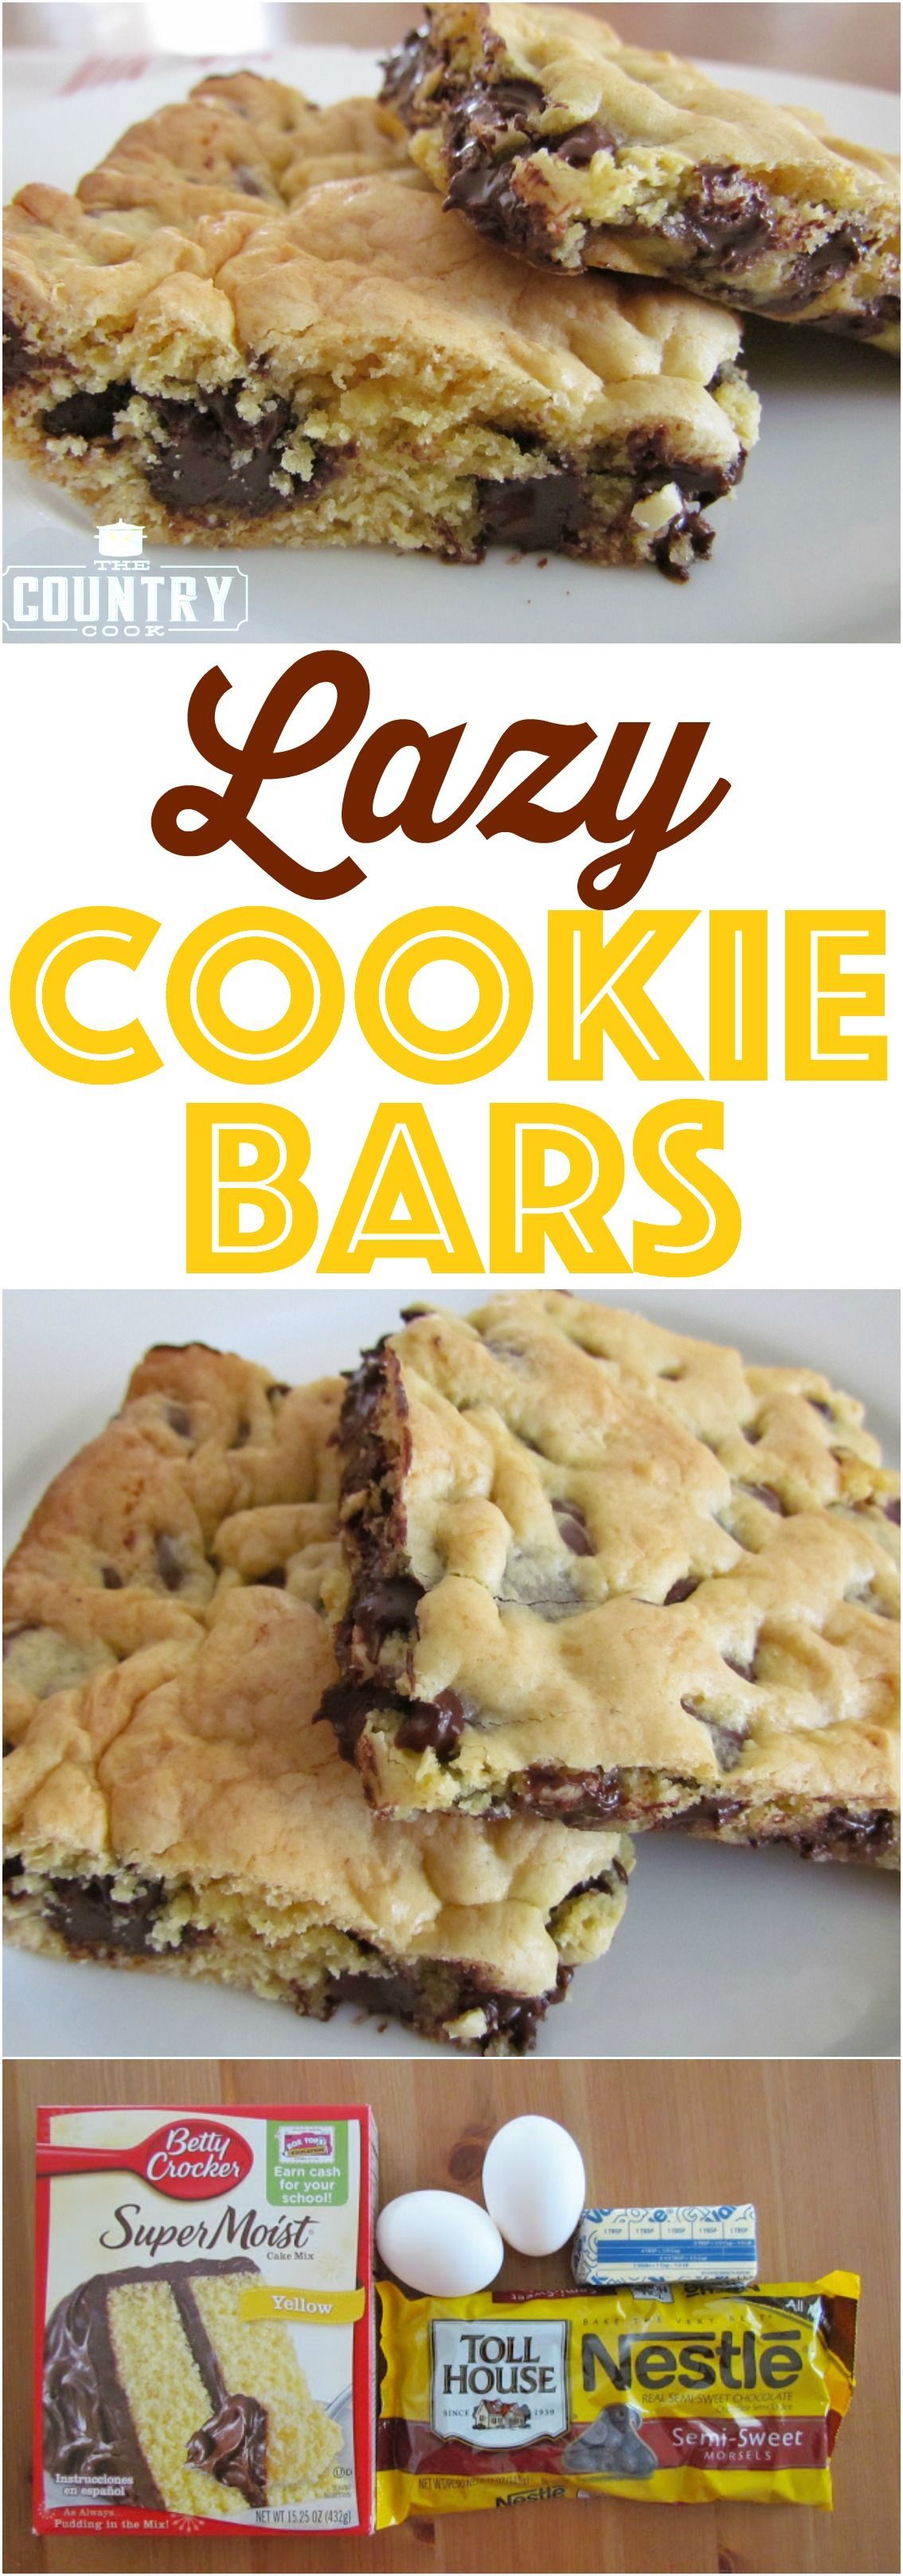 Lazy Chocolate Chip Cookie Bars are made with a boxed cake mix and butter and chocolate chips. So tender and yummy. We make these